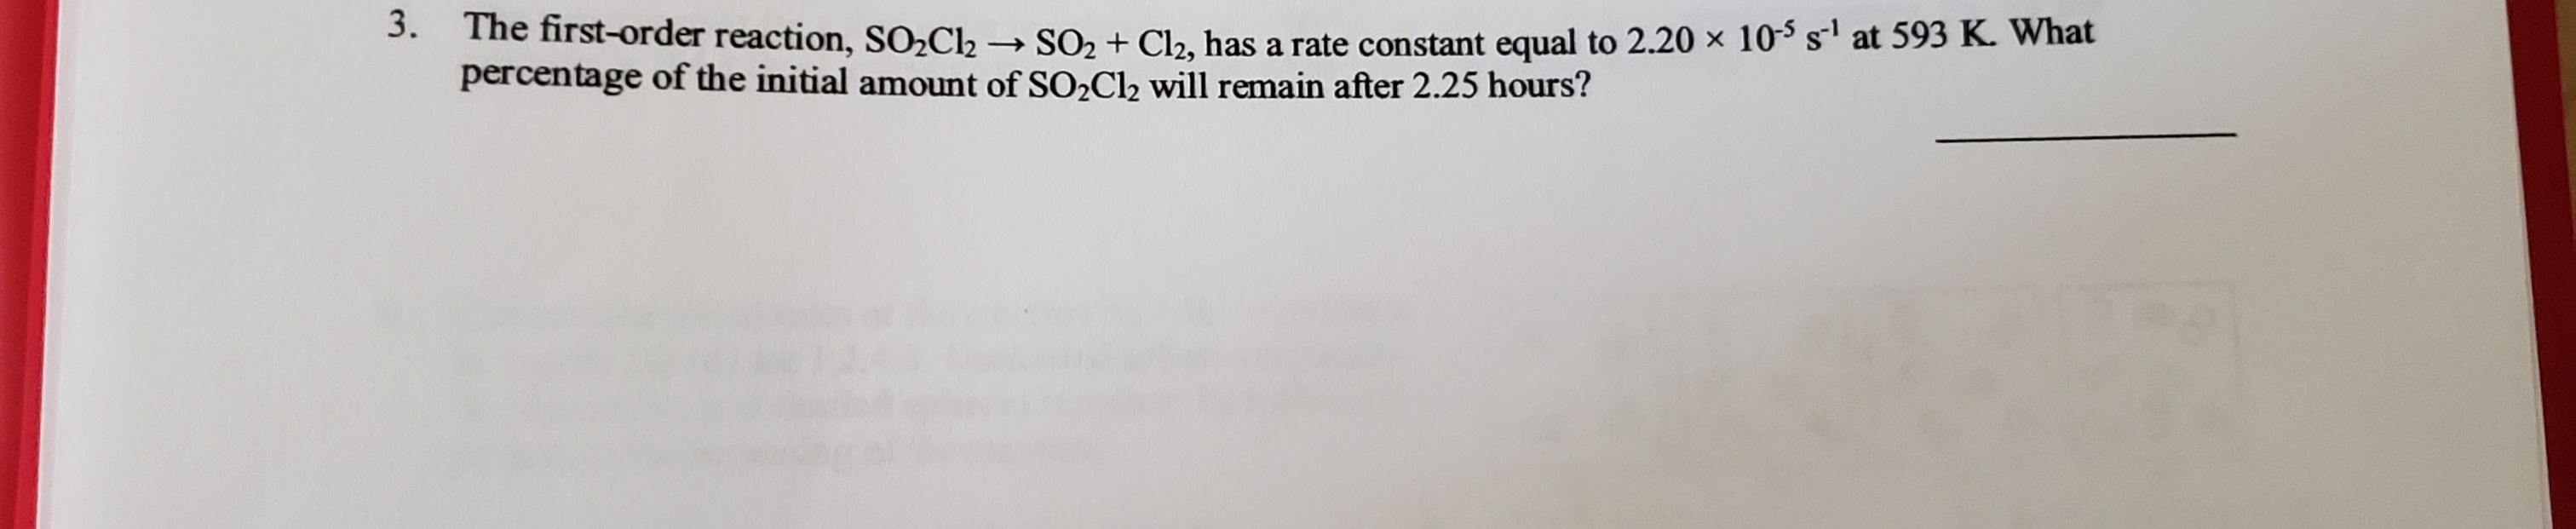 3.
The first-order reaction, SO2C12
→ SO2 + Cl2, has a rate constant equal to 2.20 × 10-$ s at 593 K. What
percentage of the initial amount of SO,Cl2 will remain after 2.25 hours?
